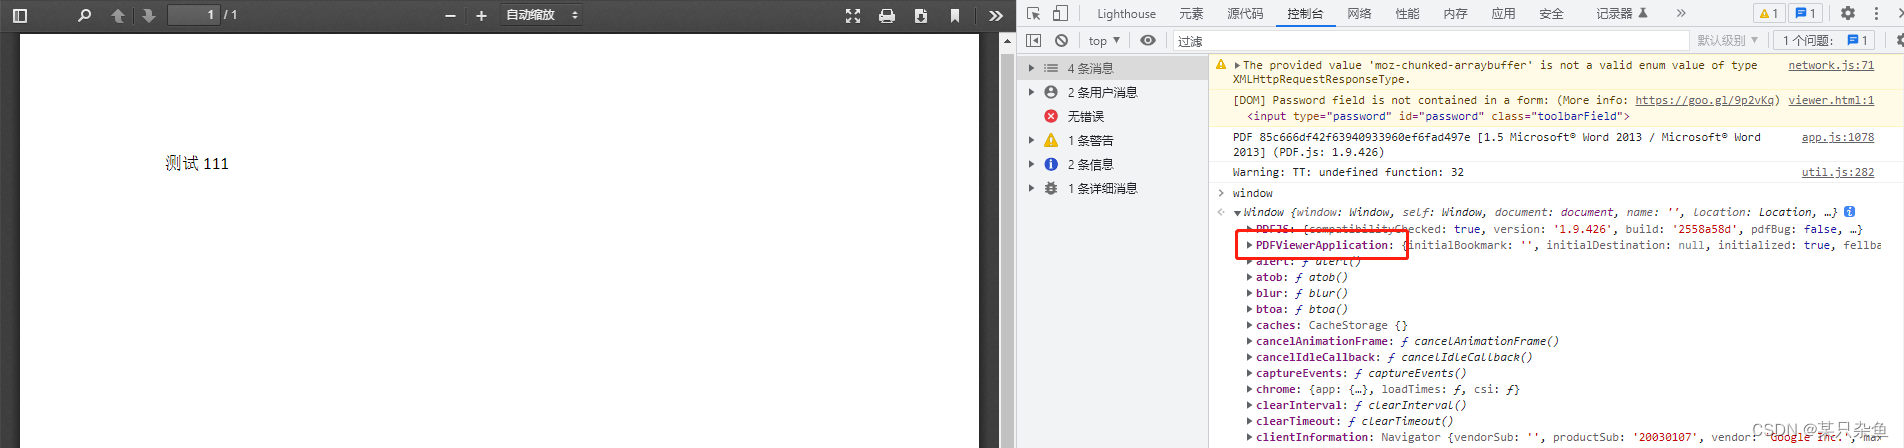 The new tab page prints the window object